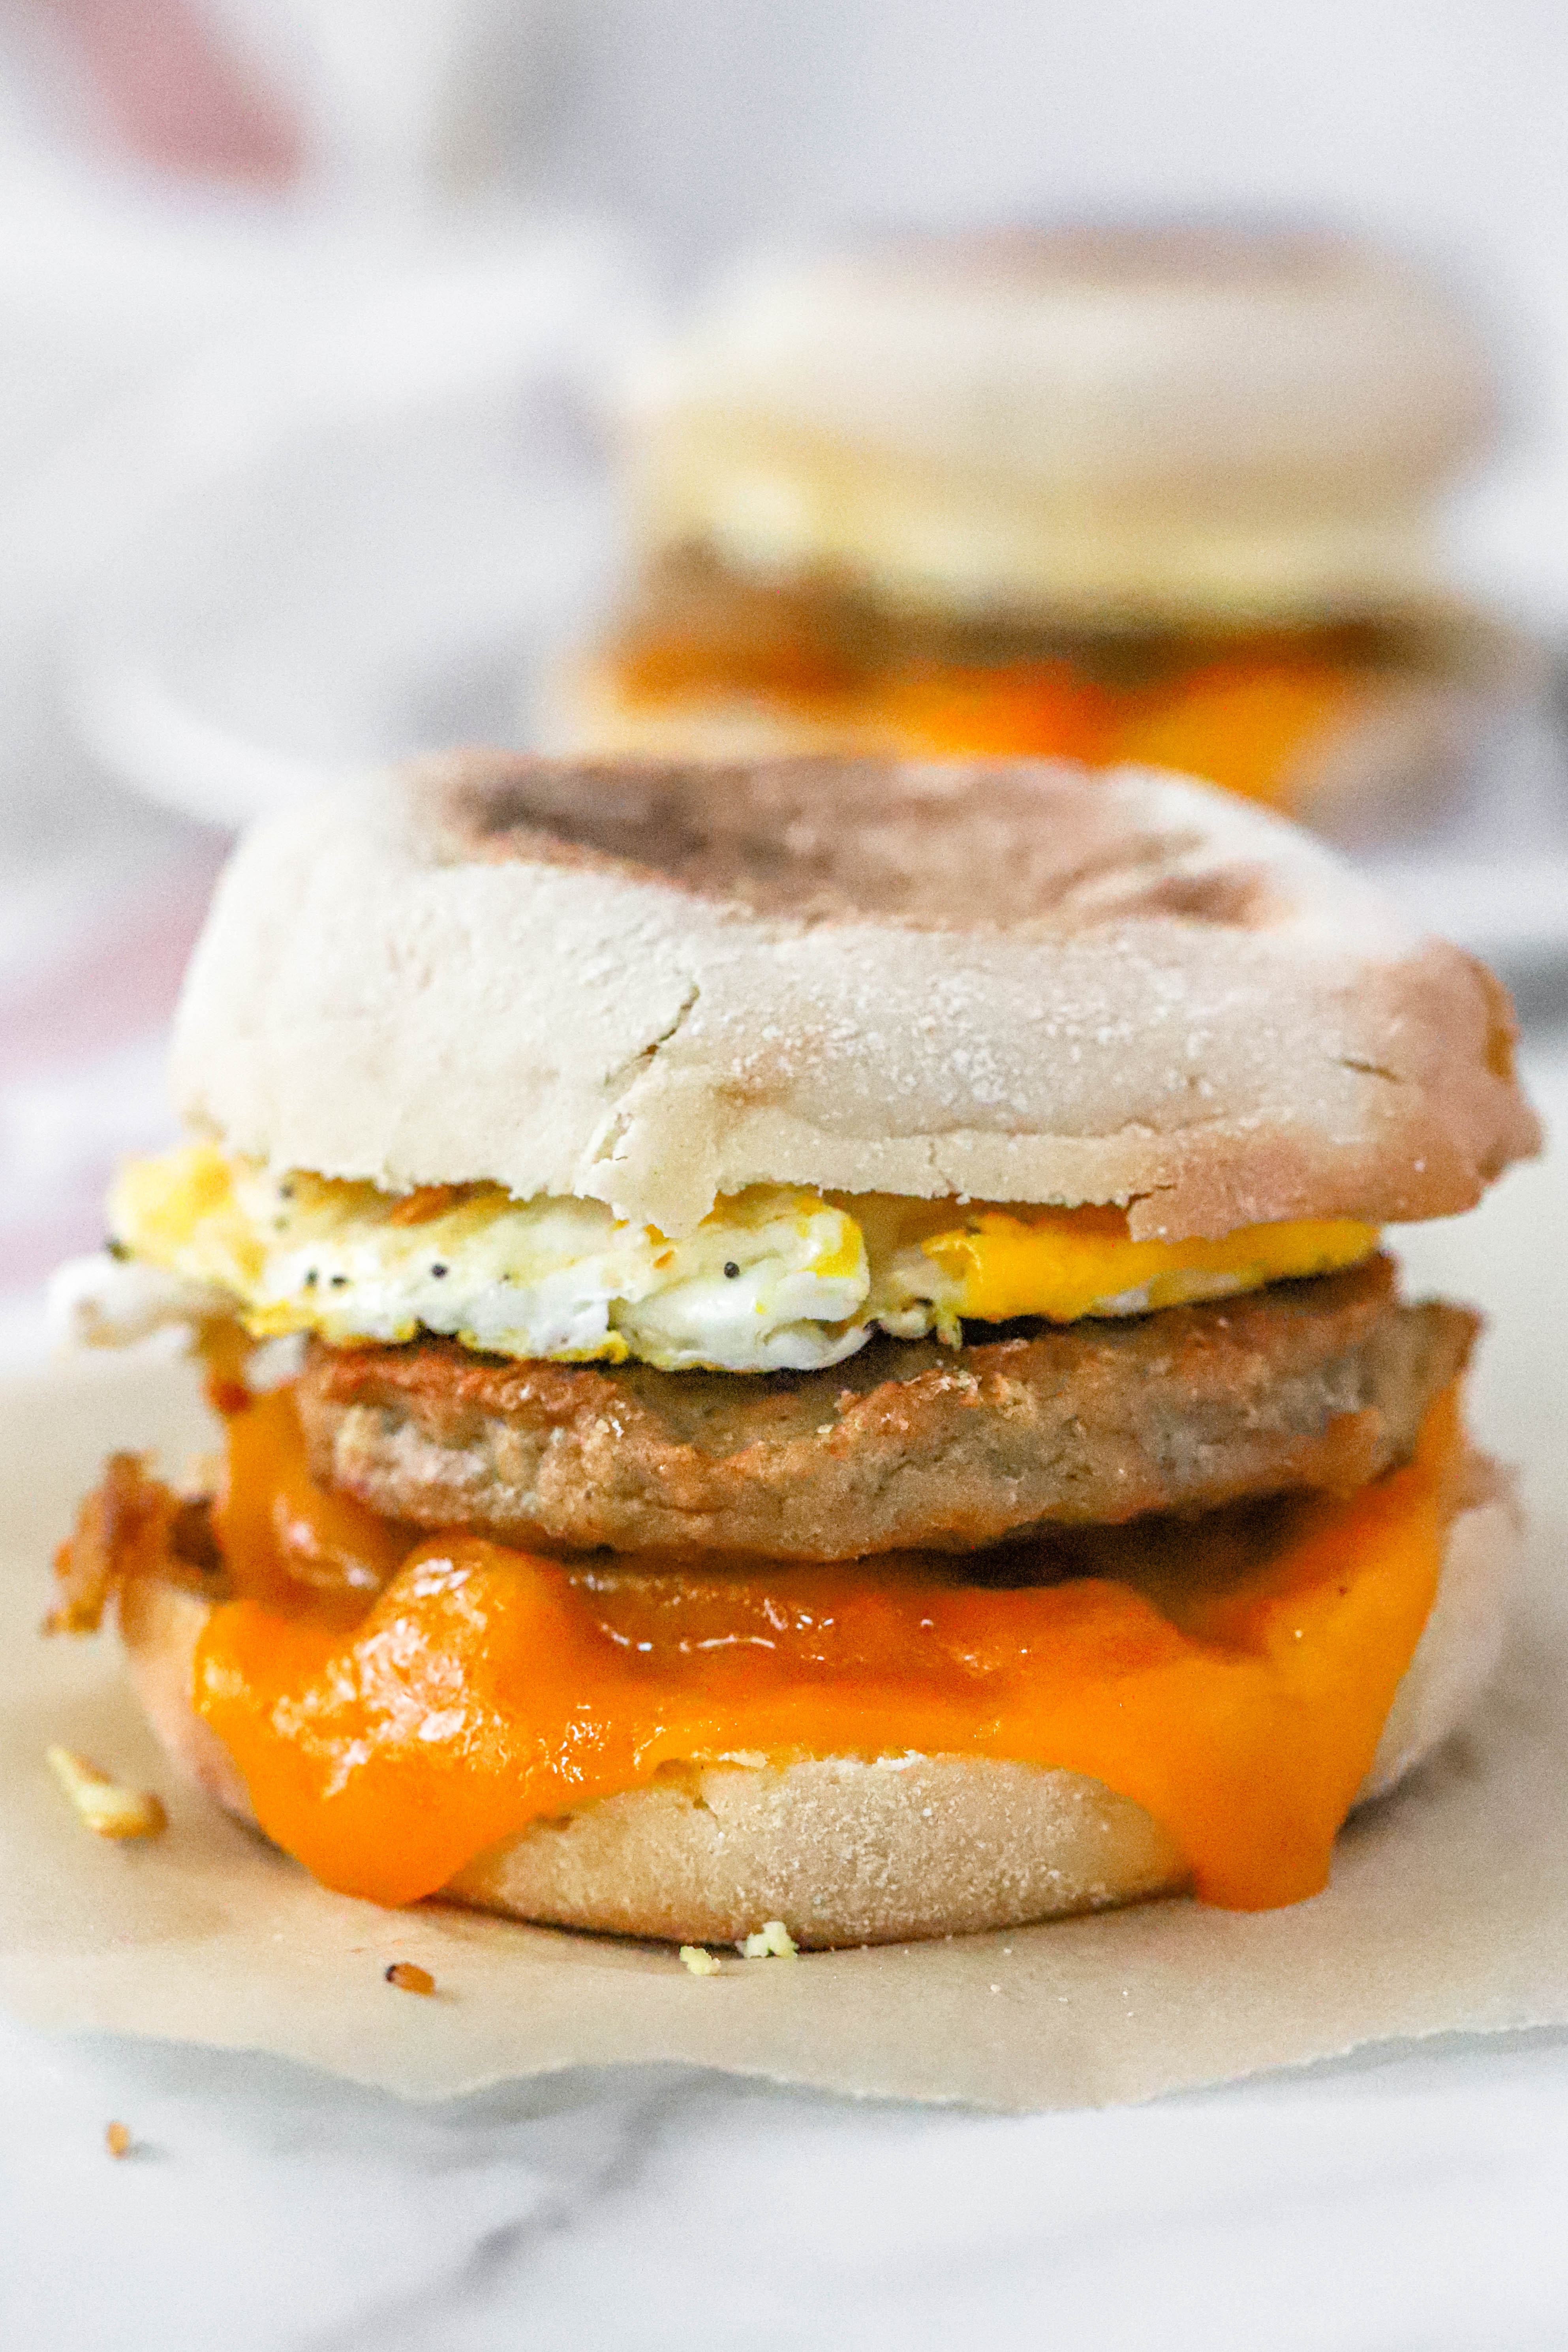 Make Your Own Egg McMuffin